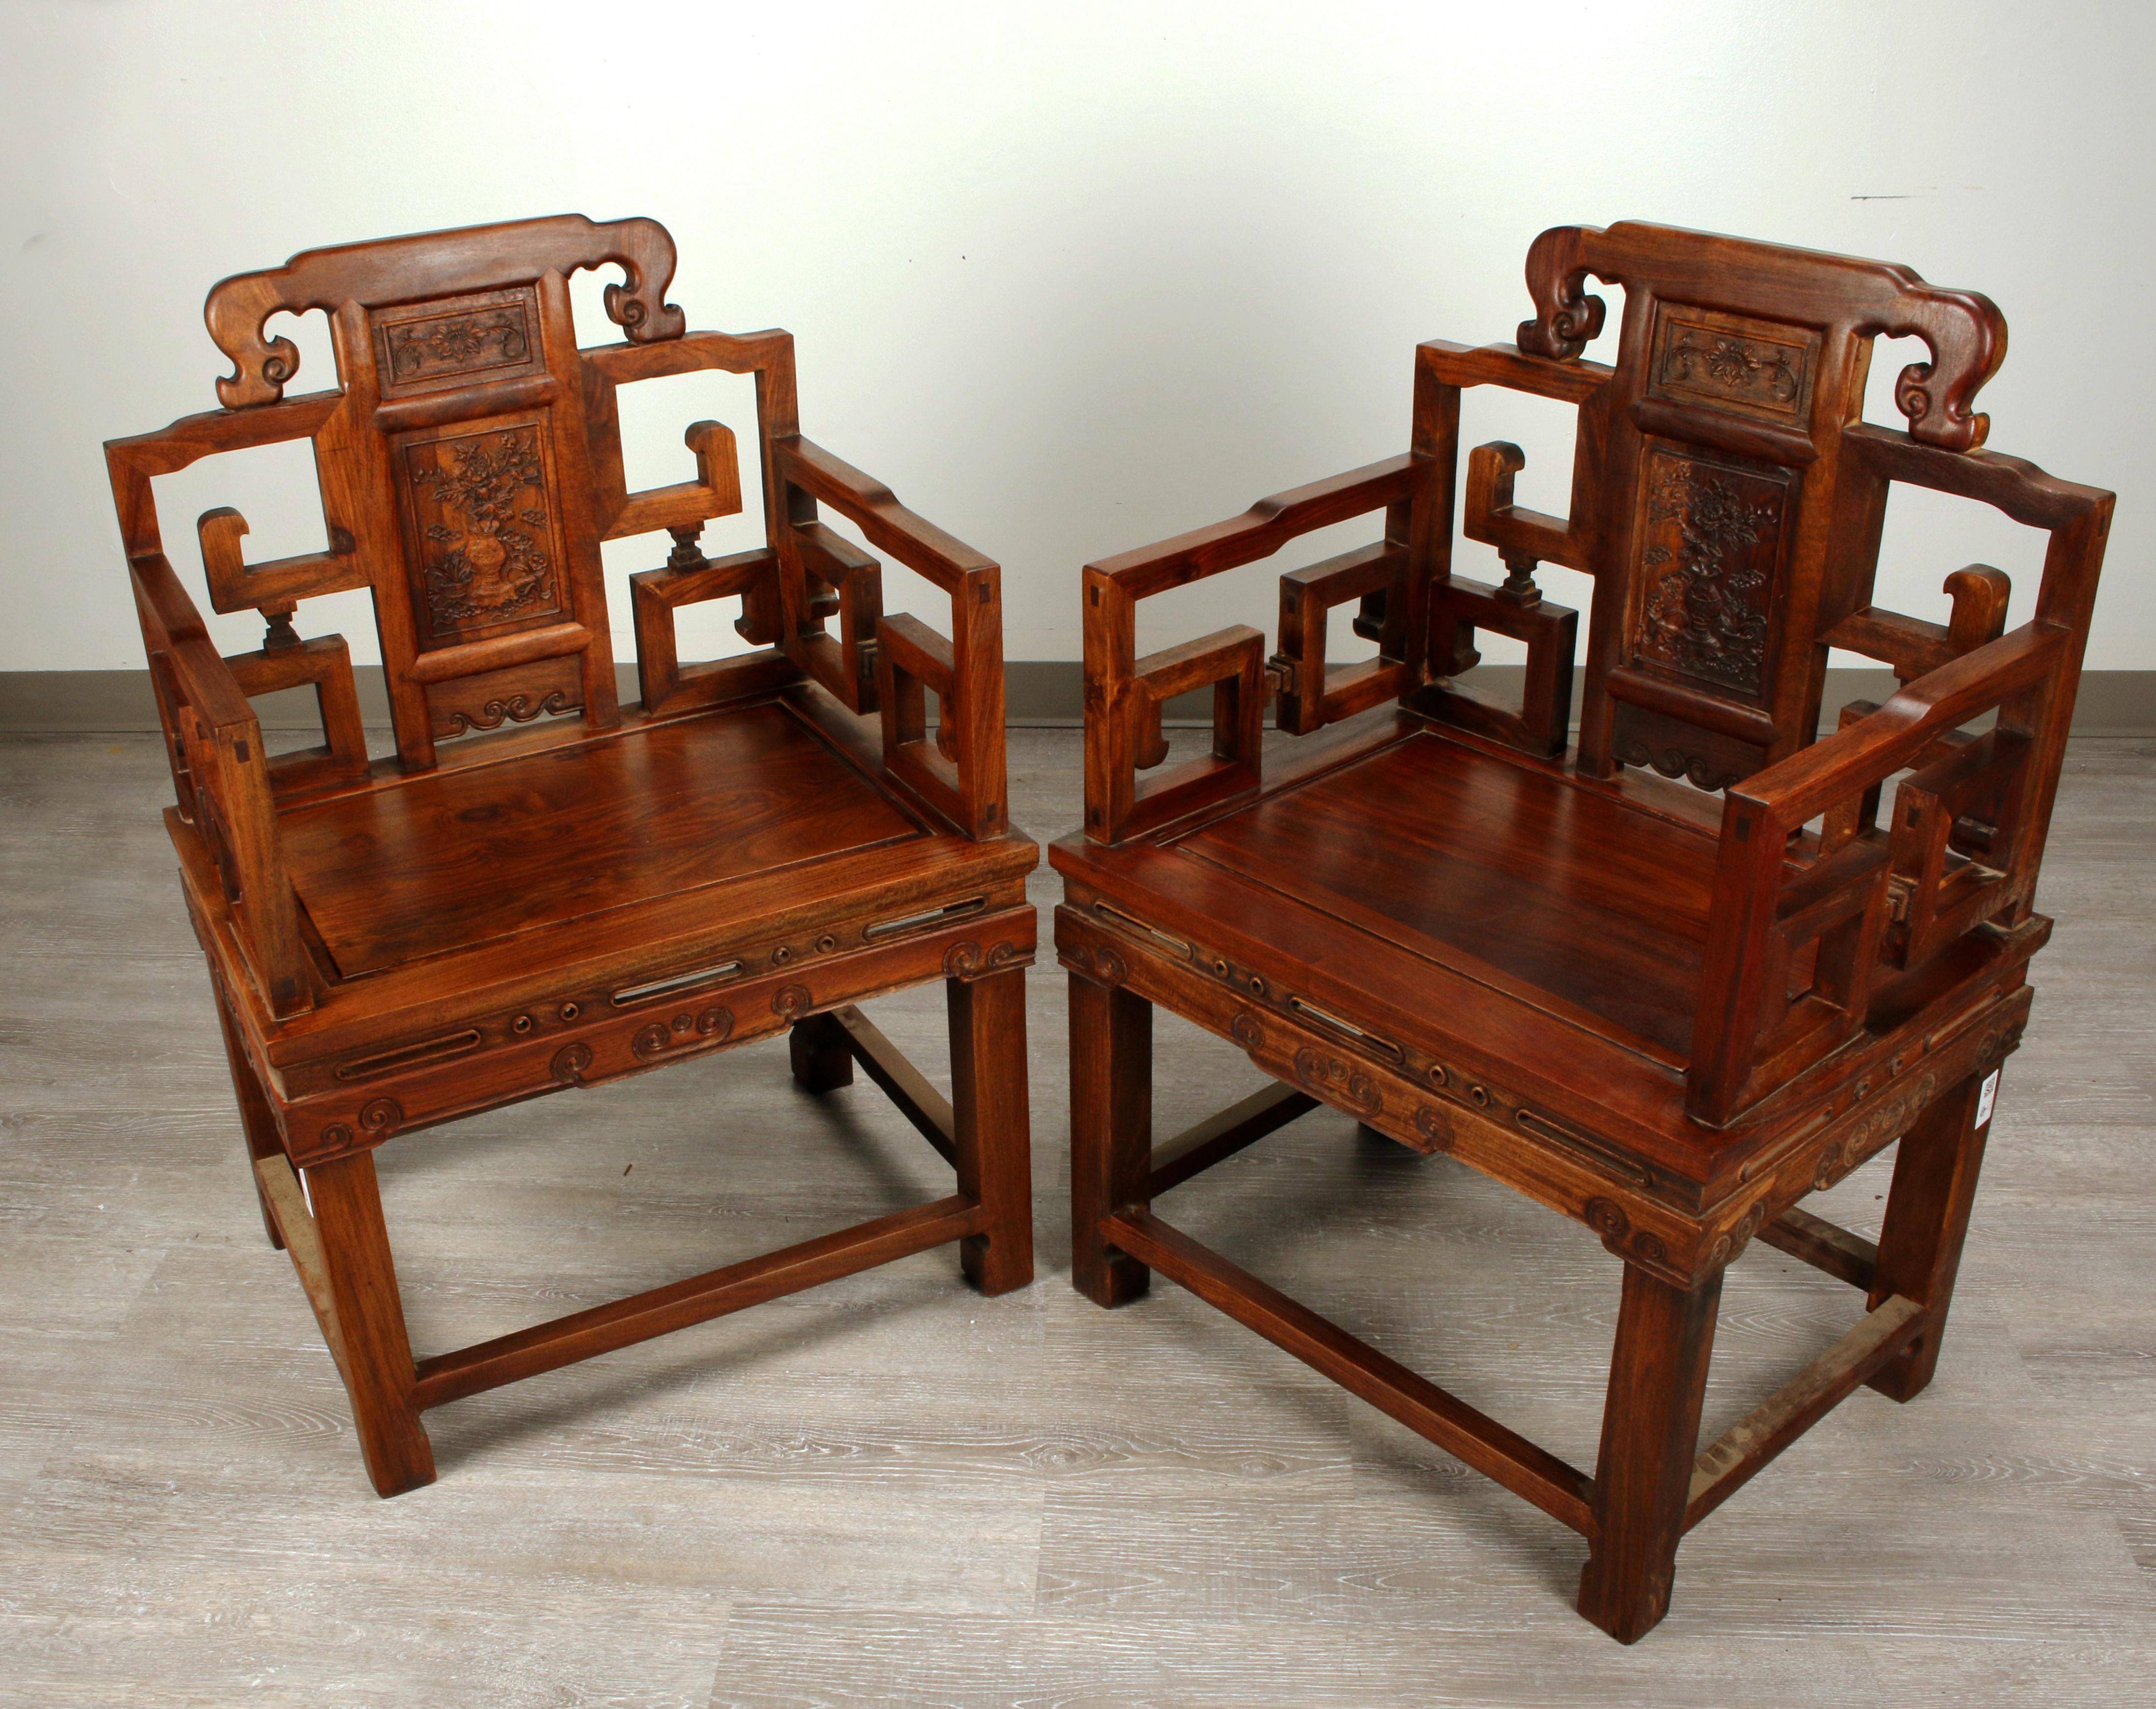 Large pair of Chinese Hongmu armchairs with rich beautiful grain patterns and carved archaic geometric back and arms. Back is carved in a vase with flowers and scholars' items.
They were made by hand with no nails, very sturdy and firm, supper